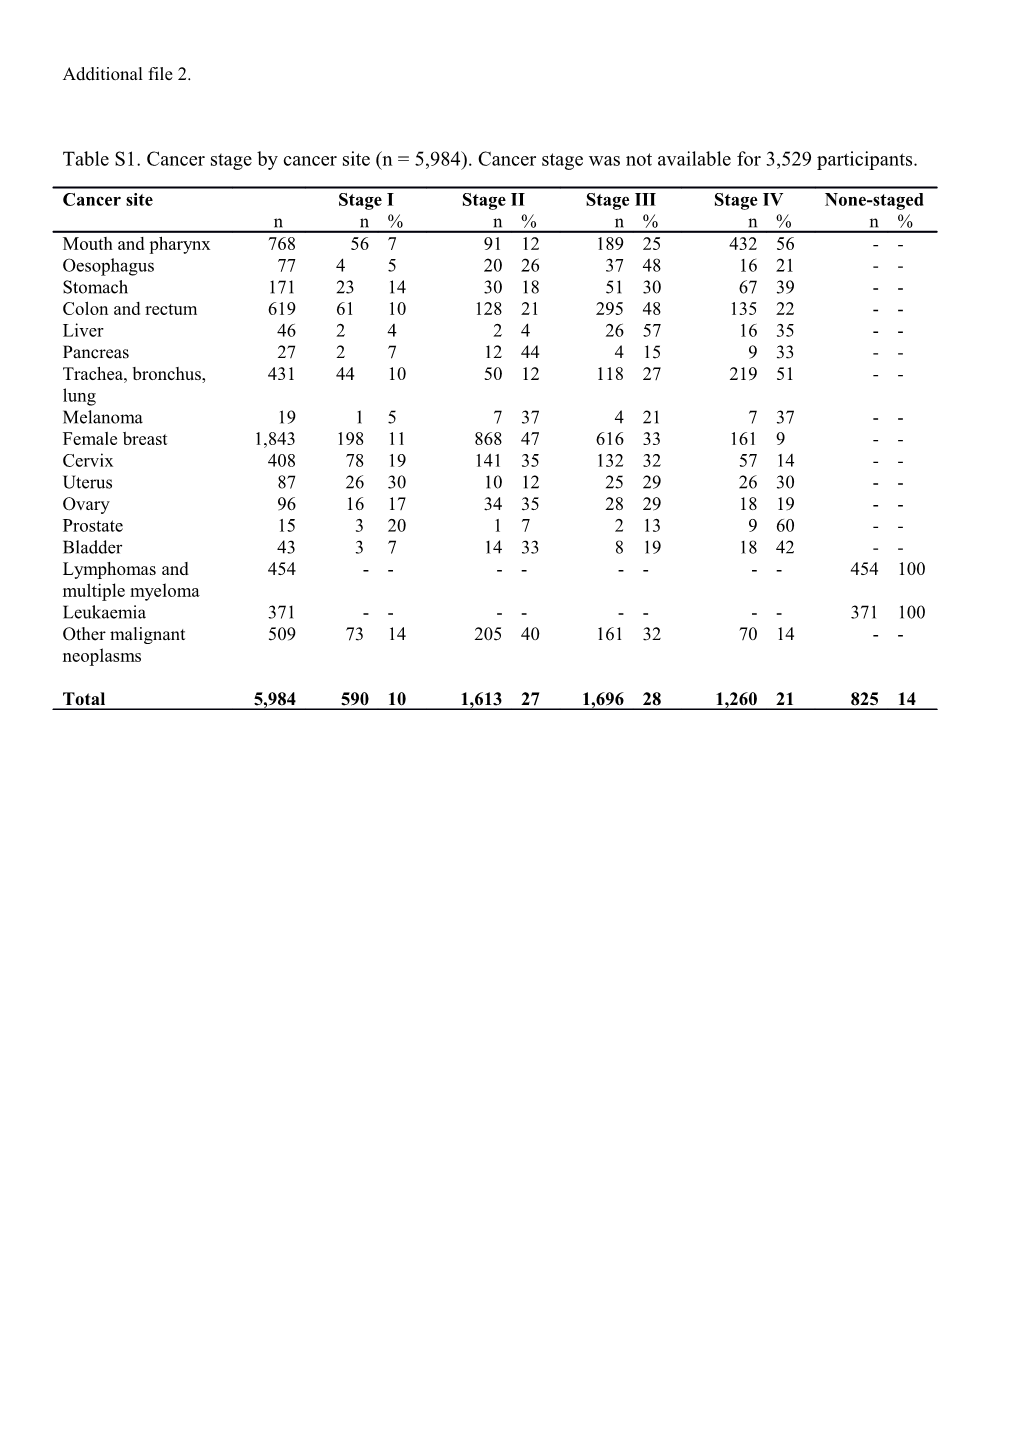 Table S1.Cancer Stage by Cancer Site (N =5,984). Cancer Stage Was Not Available for 3,529